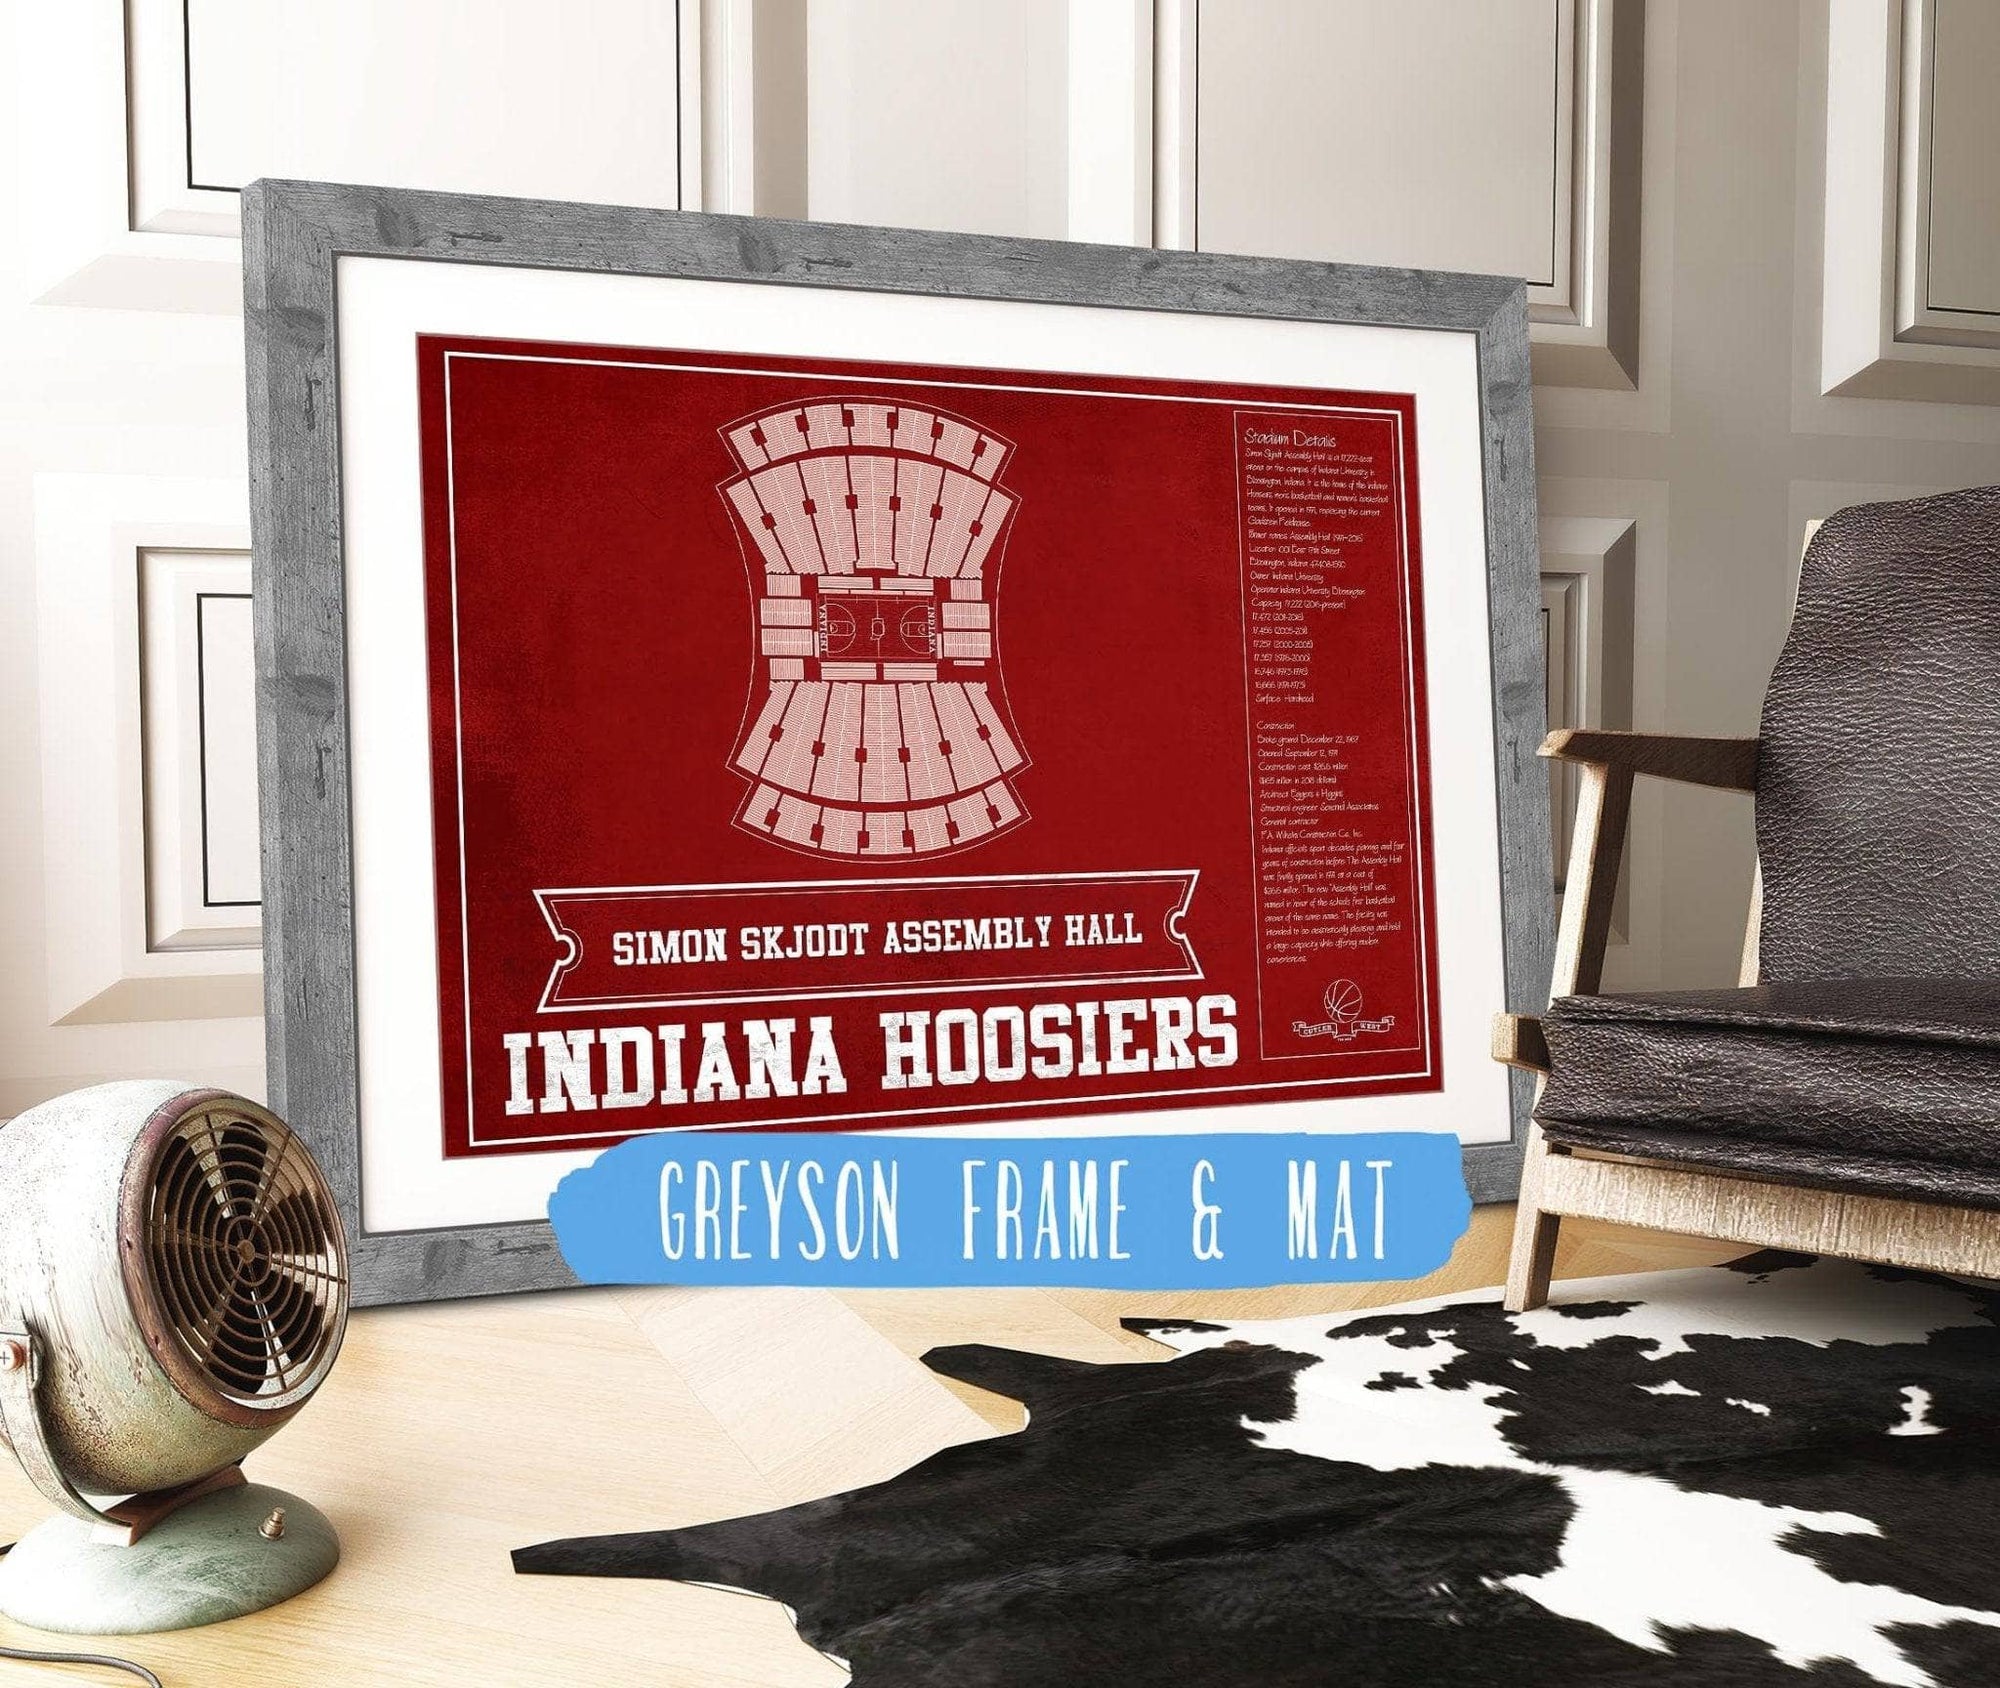 Cutler West Basketball Collection 14" x 11" / Greyson Frame & Mat Simon Skjodt Assembly Hall Indiana Hoosiers Team Color NCAA Vintage Print 933350232_83368